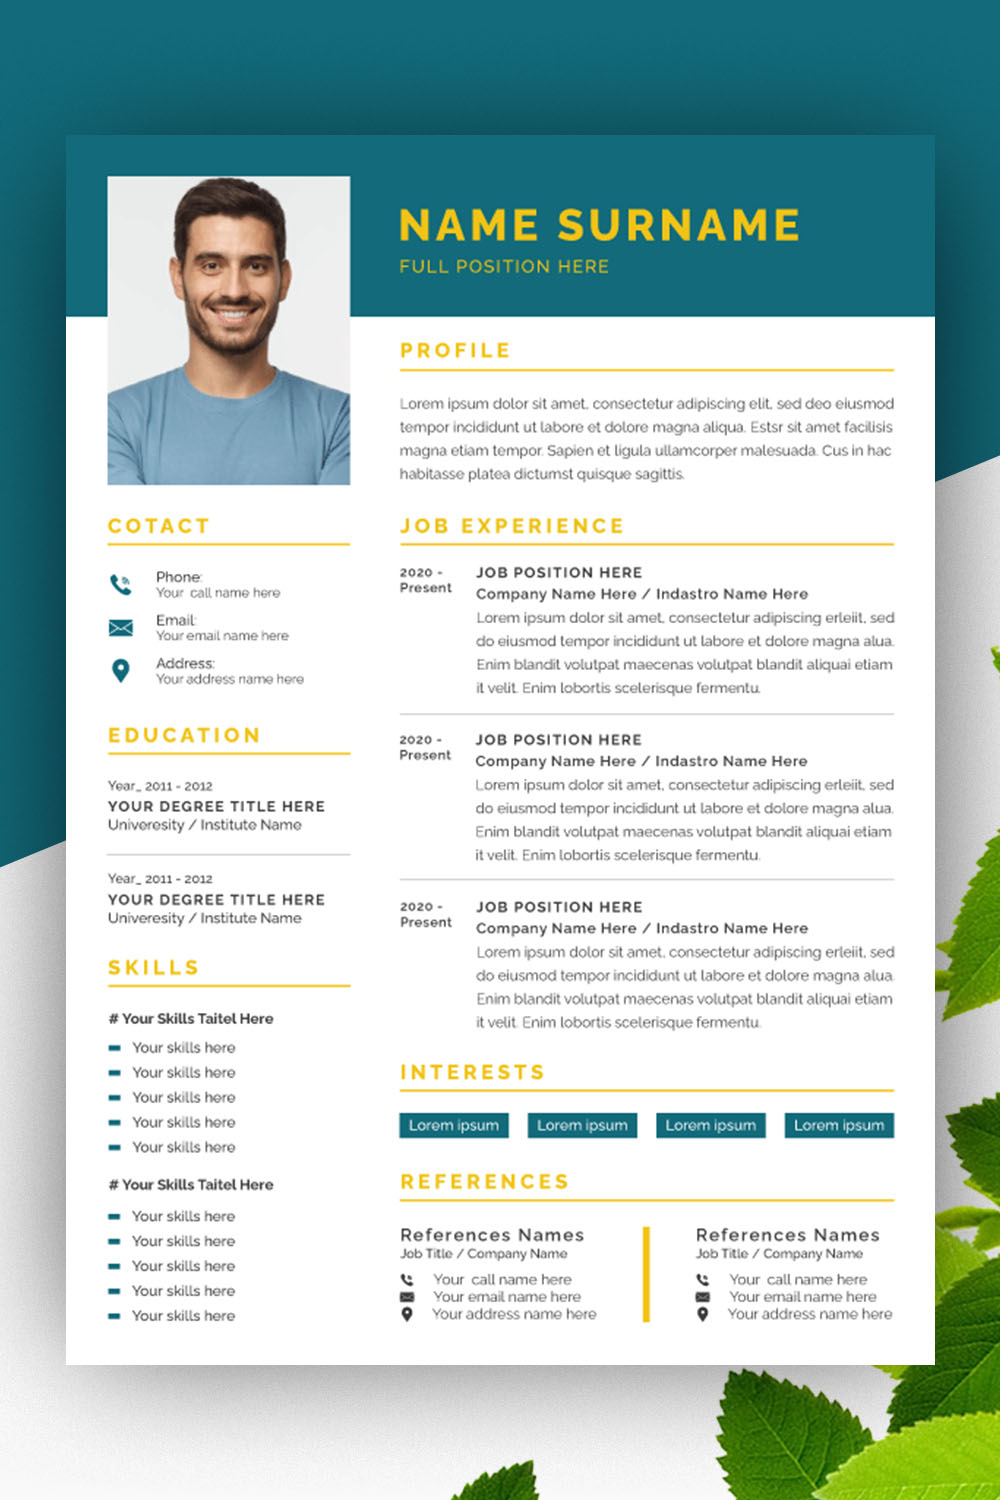 Clean Resume Layout Resume Design and Cover Letter Page Set pinterest preview image.